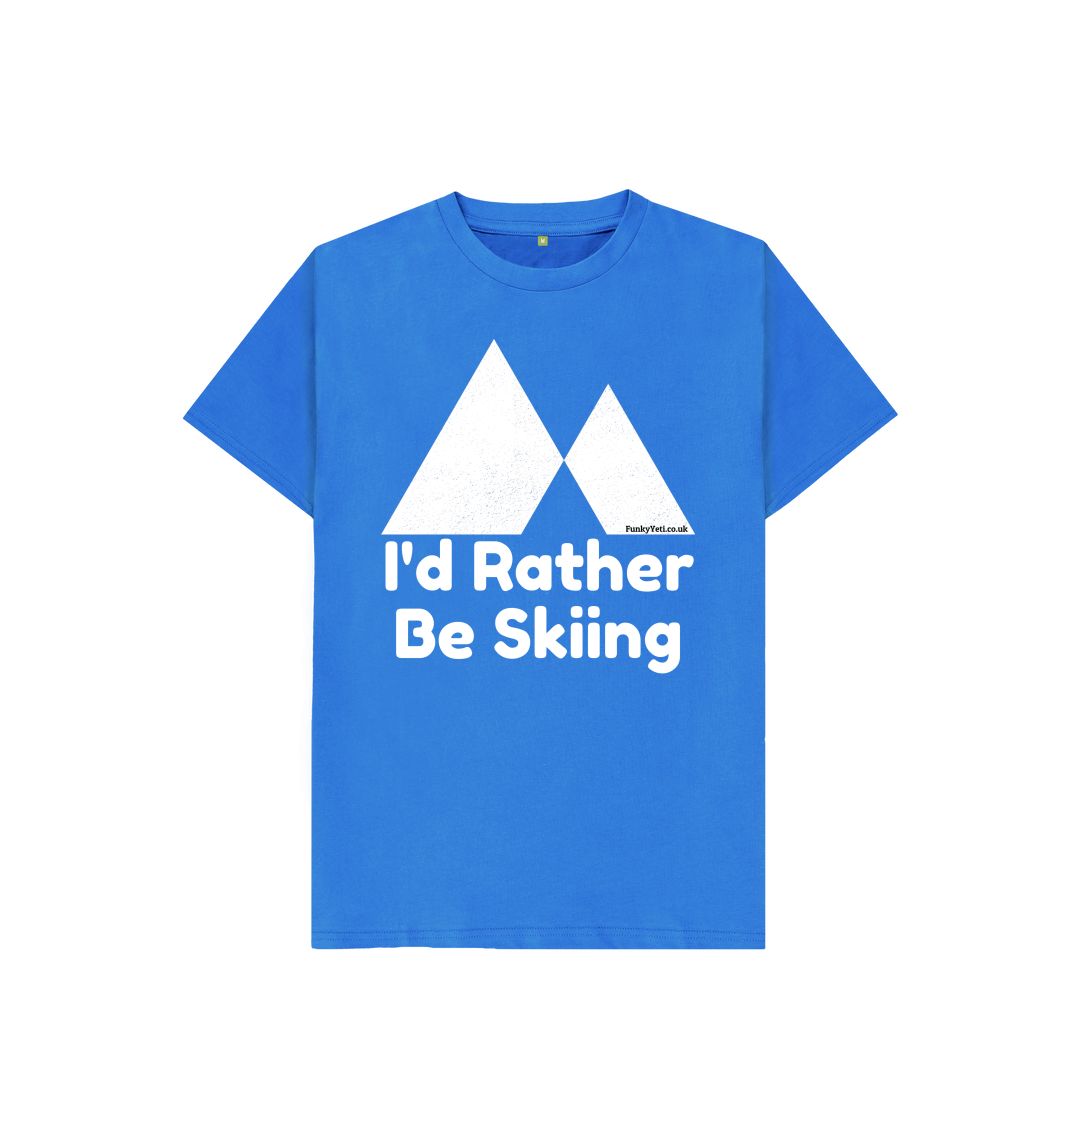 Bright Blue Funky Yeti Kids Tee - I'd Rather Be Skiing